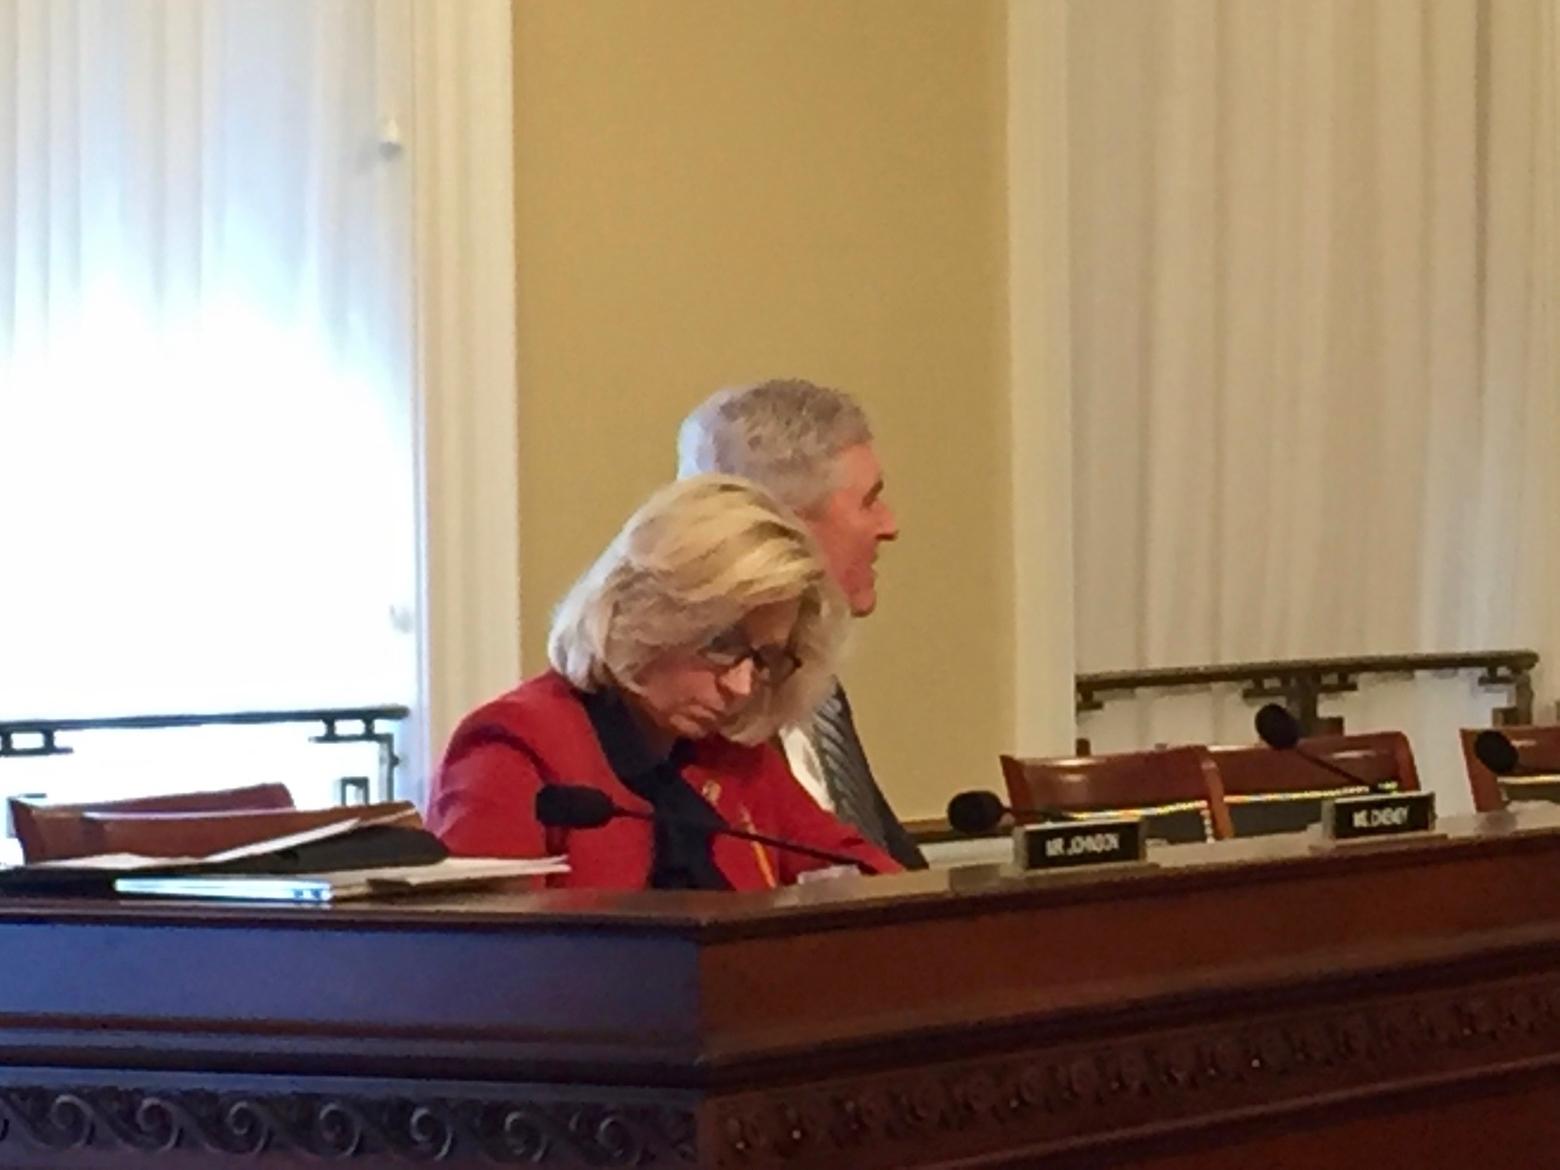 U.S. Rep. Liz Cheney of Wyoming, a resident of the Greater Yellowstone community of Wilson, looked over notes last week while preparing for the start of the House Resources Committee's first meeting in 2019, with the first topic involving a debate over whether God should be invoked when witnesses swear an oath to truthfulness. Photo by Todd Wilkinson